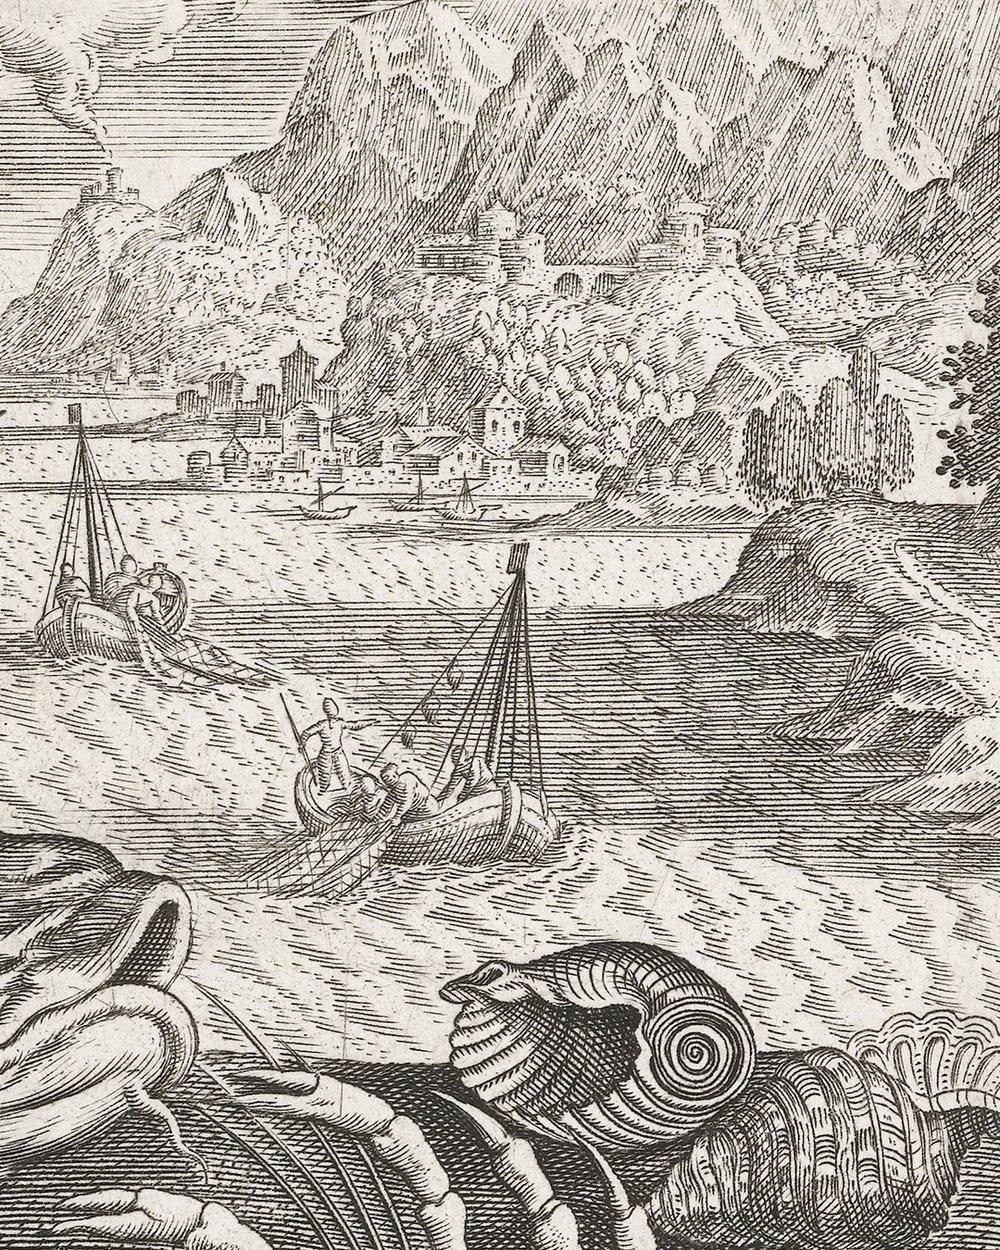 ''Two fish on the beach'' (1598 - 1618)